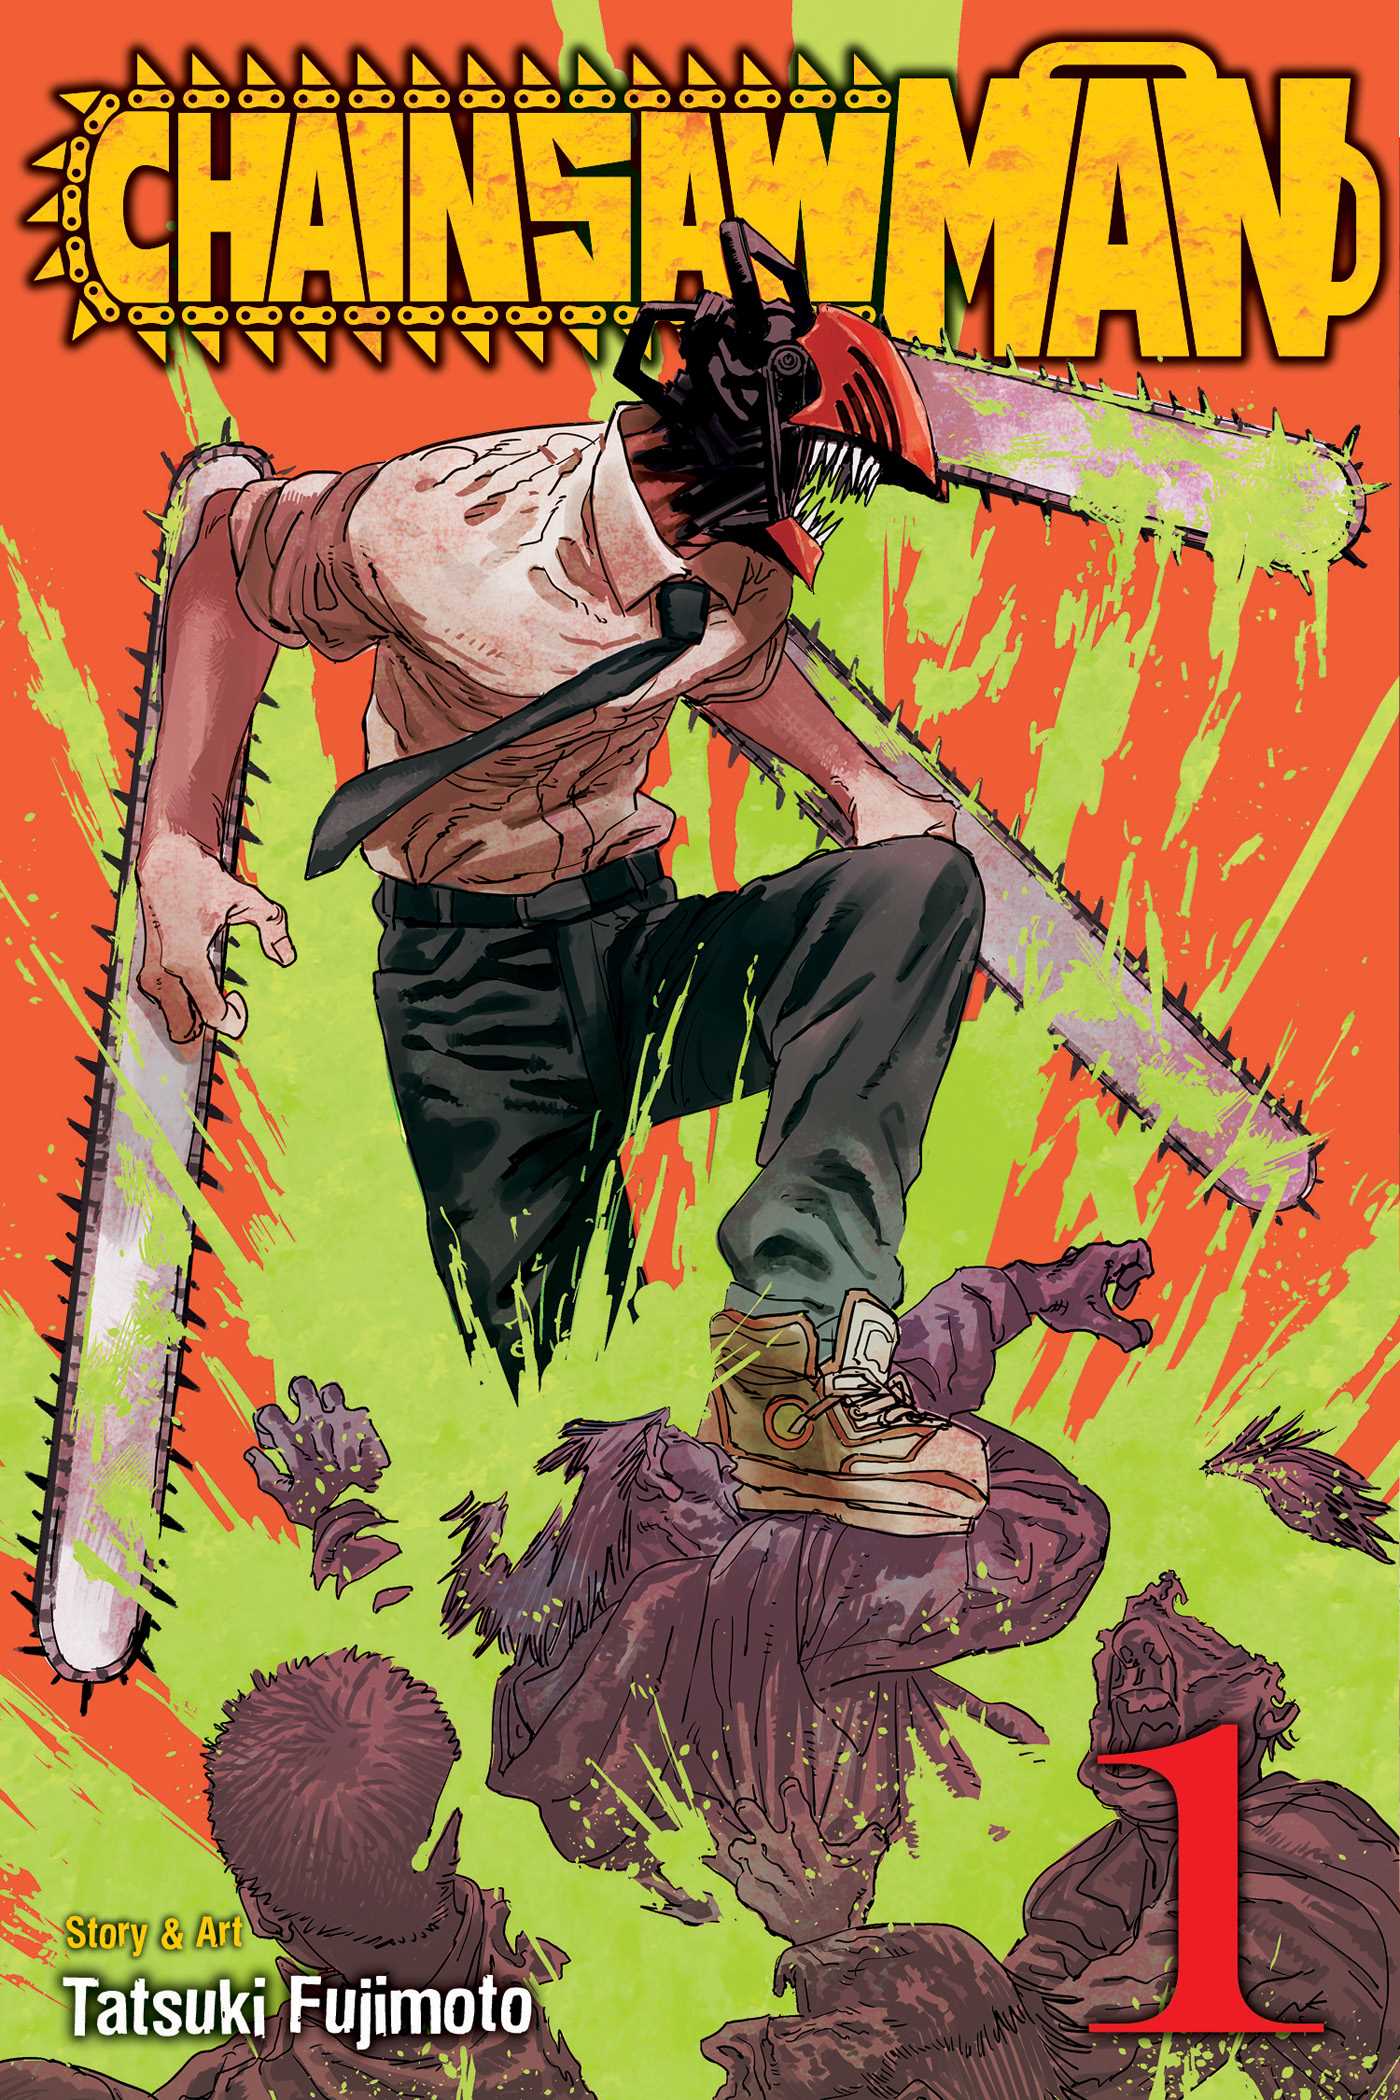 Chainsaw Man book cover